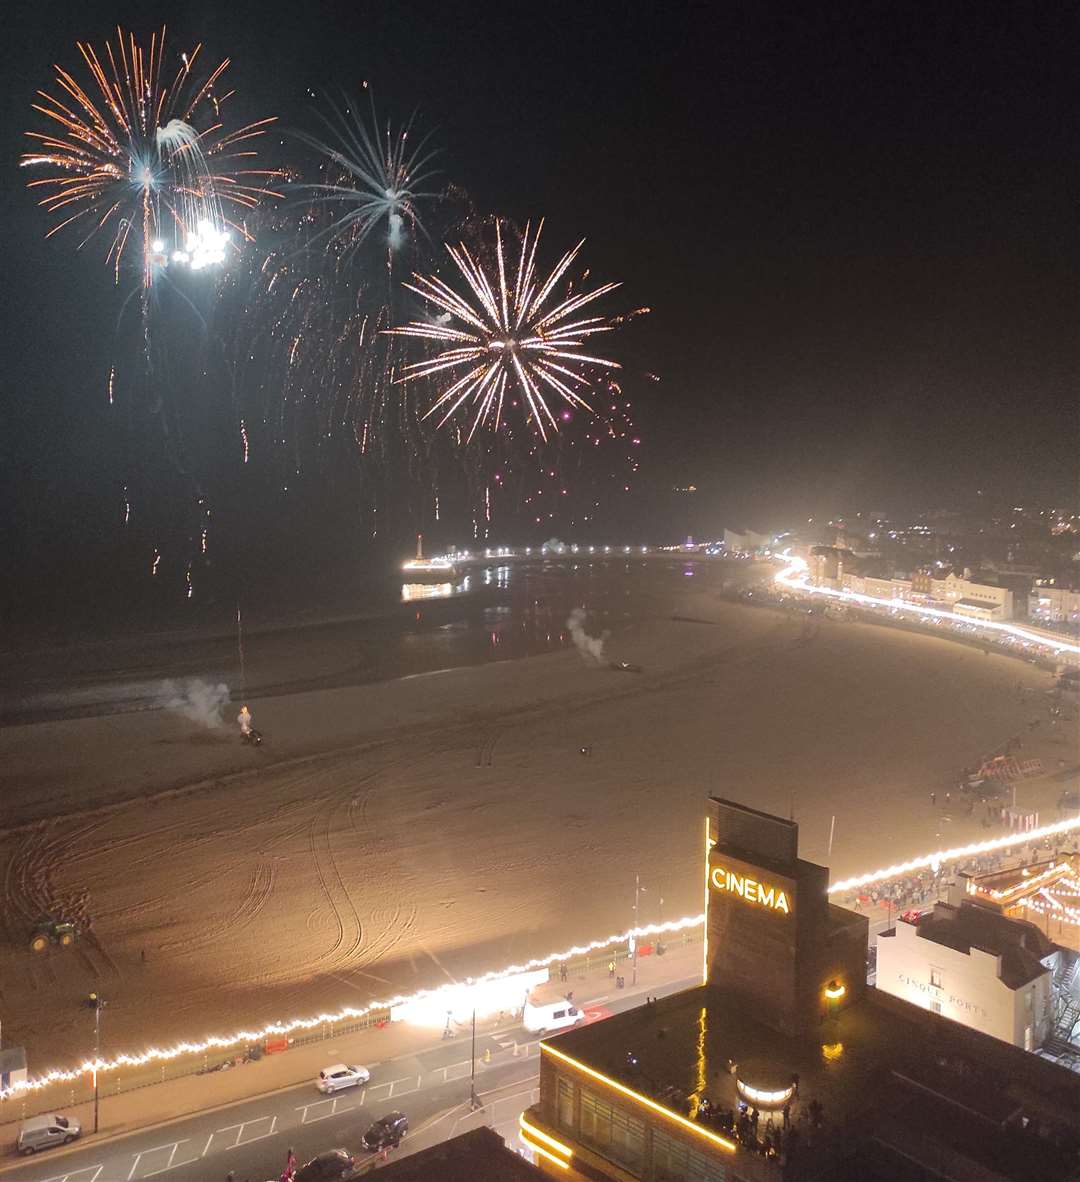 Huge firework displays were set off for the filming of Empire of Light. Picture: Jamie Shaw